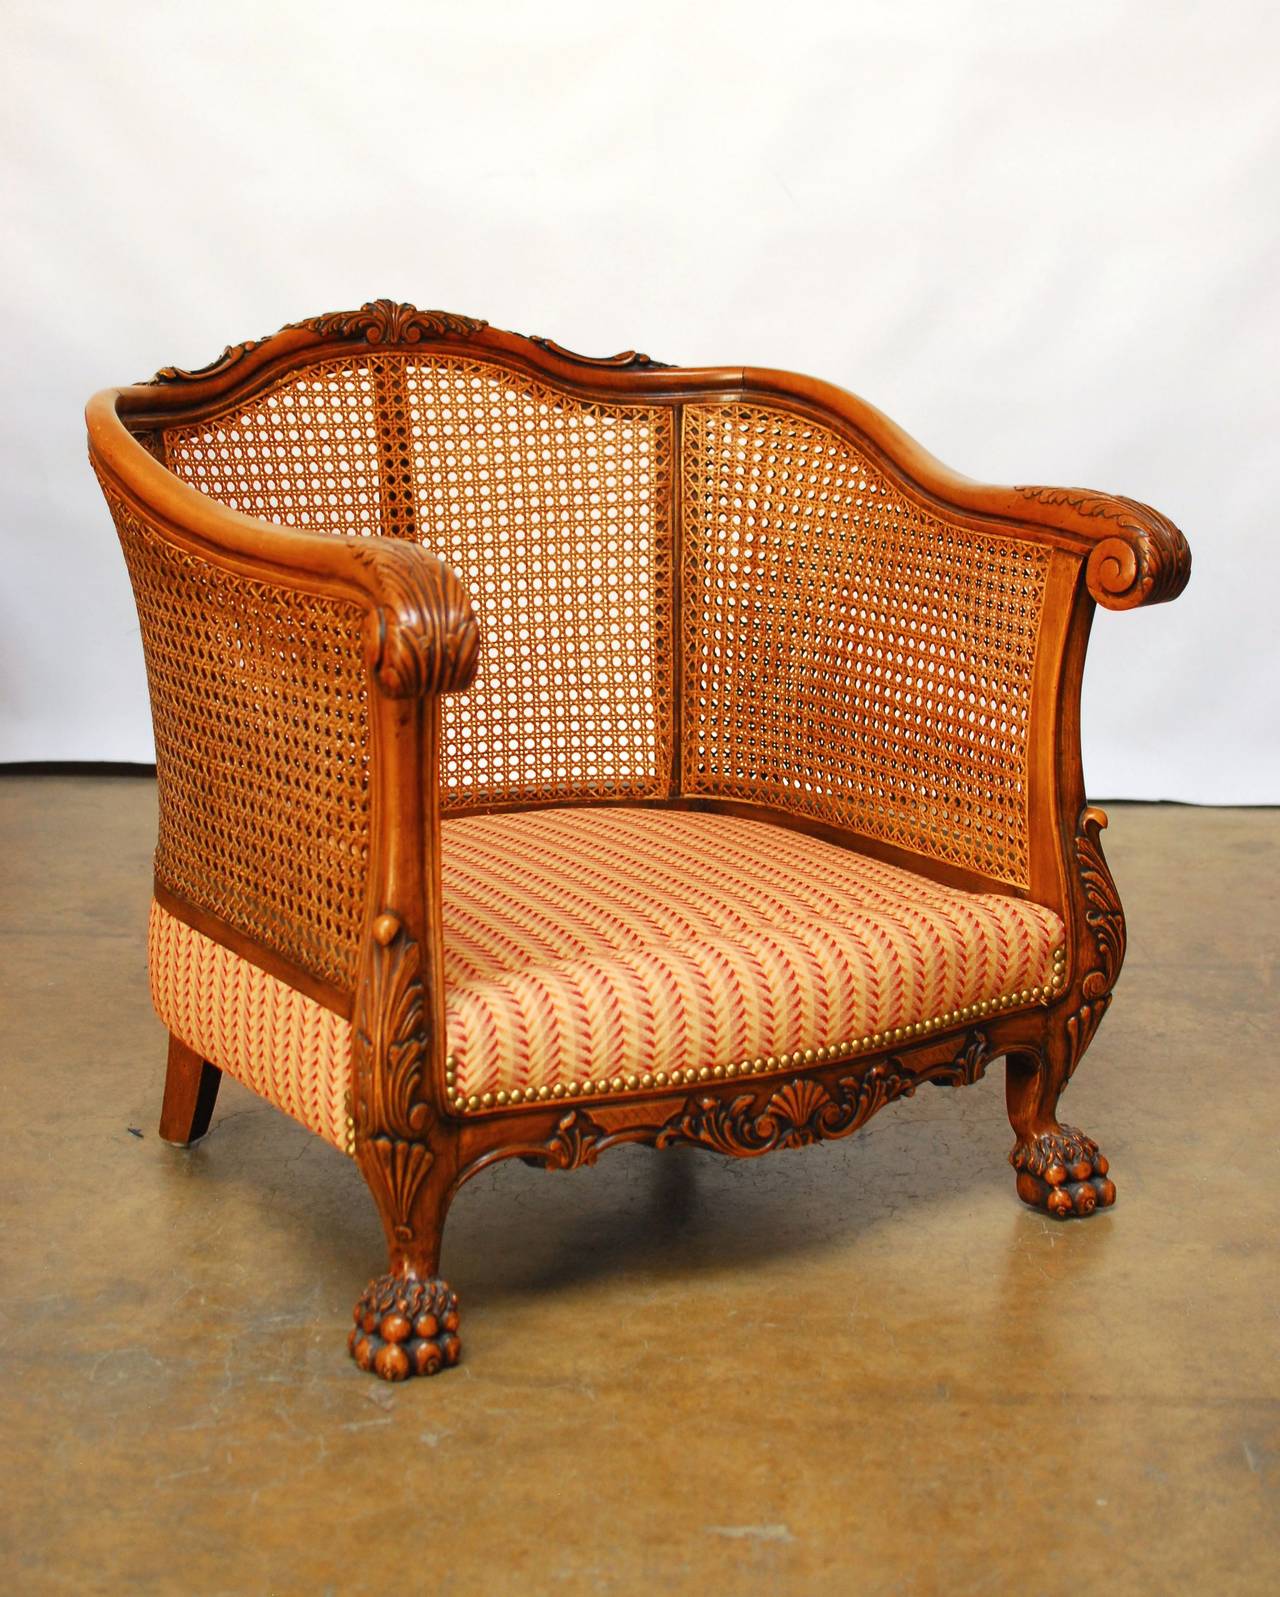 Napoleon III 19th Century French Cane Bergére Chairs